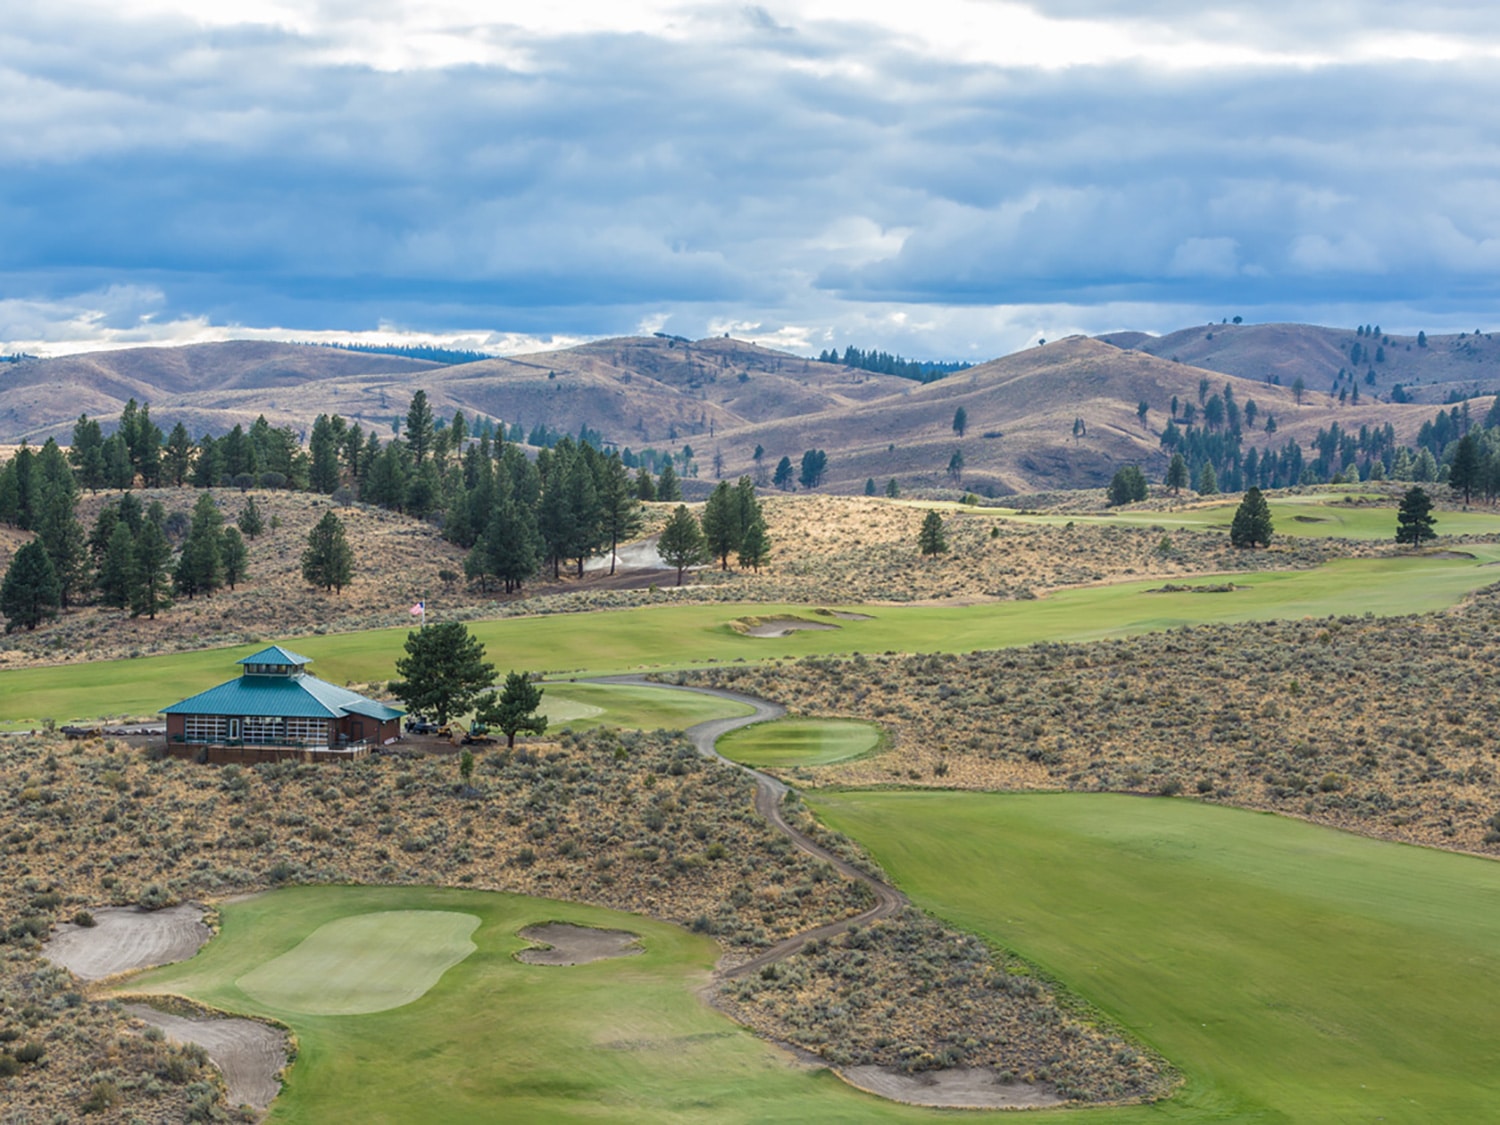 Silvies Valley Ranch in Oregon is home to a variety of celebrated golf courses, from challenging 18-hole designs to the world's first reversible putting course.